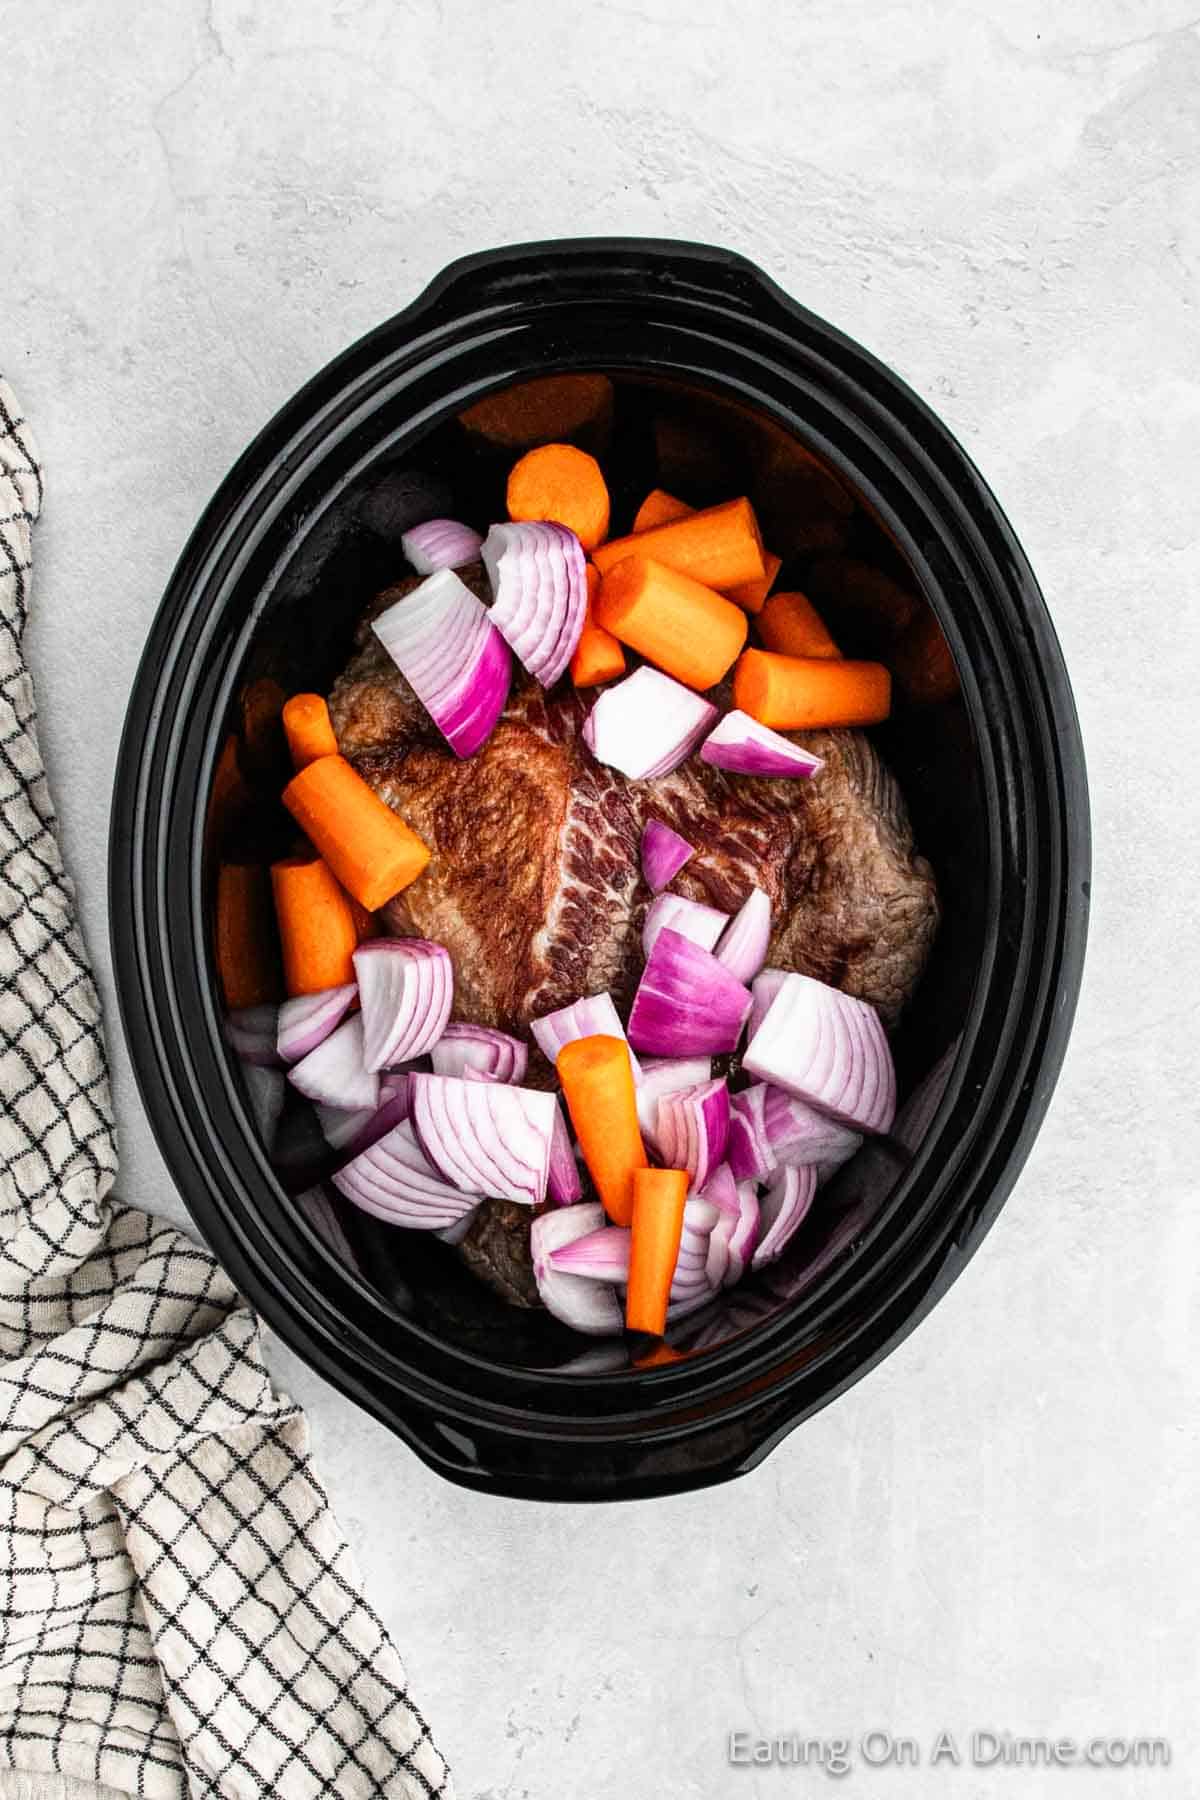 Brisket in a slow cooker with carrots and red onion